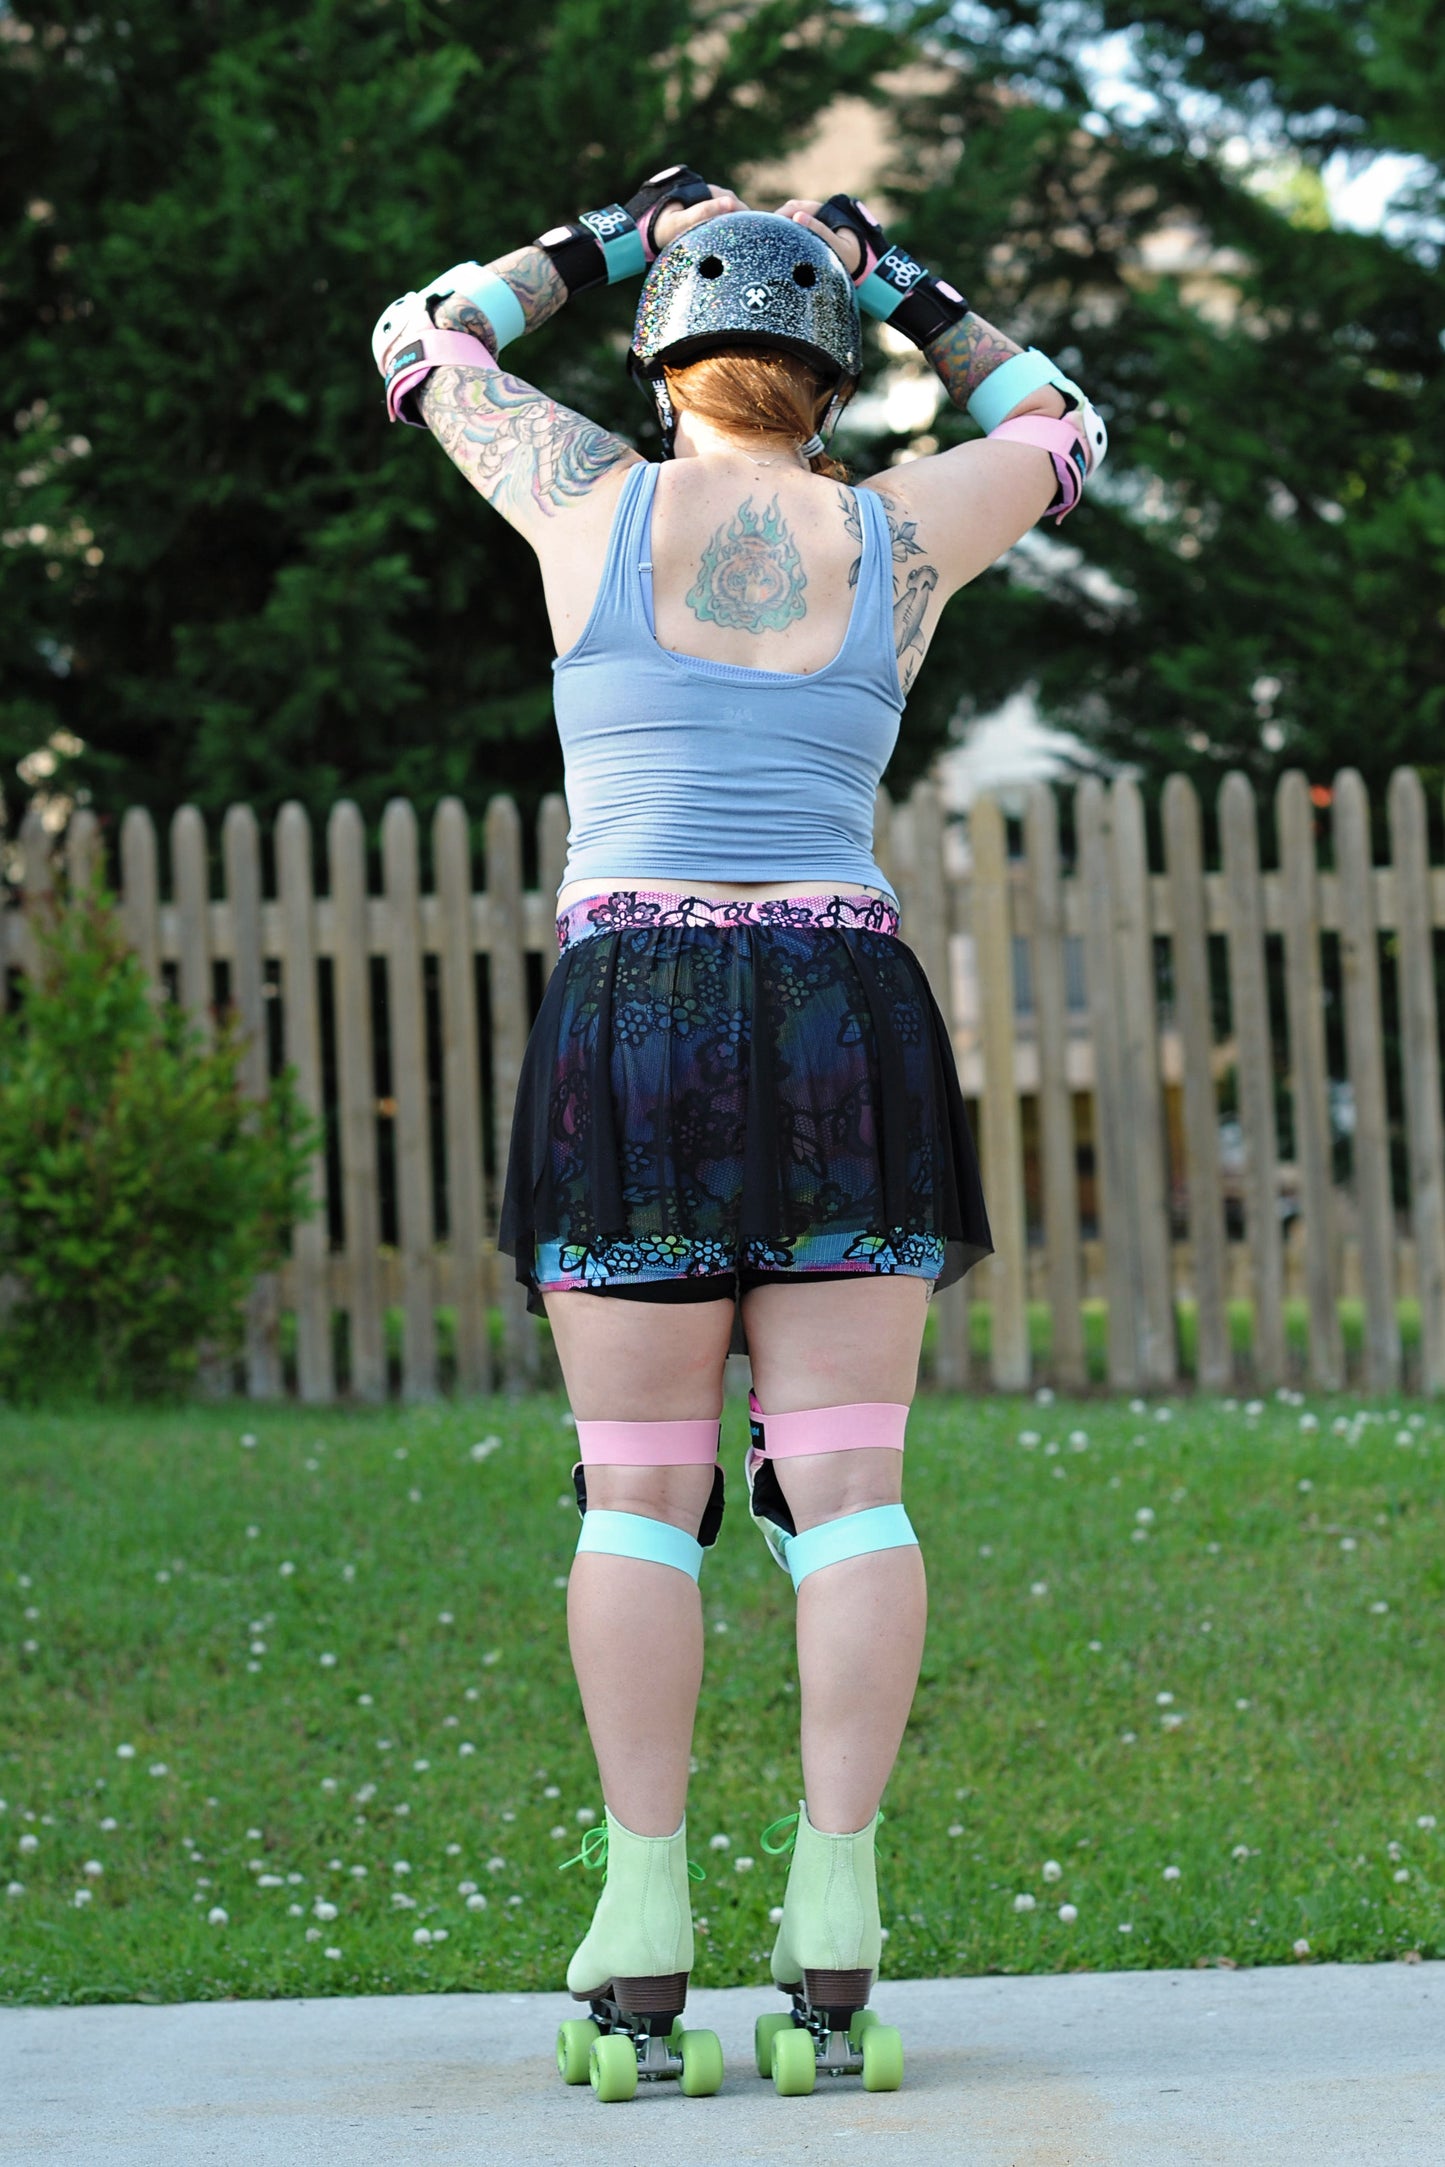 Adult Sporty Skorty Skirt, Shorts to full length yoga pants - Digital PDF Sewing Pattern - 28" hip to 83" hip